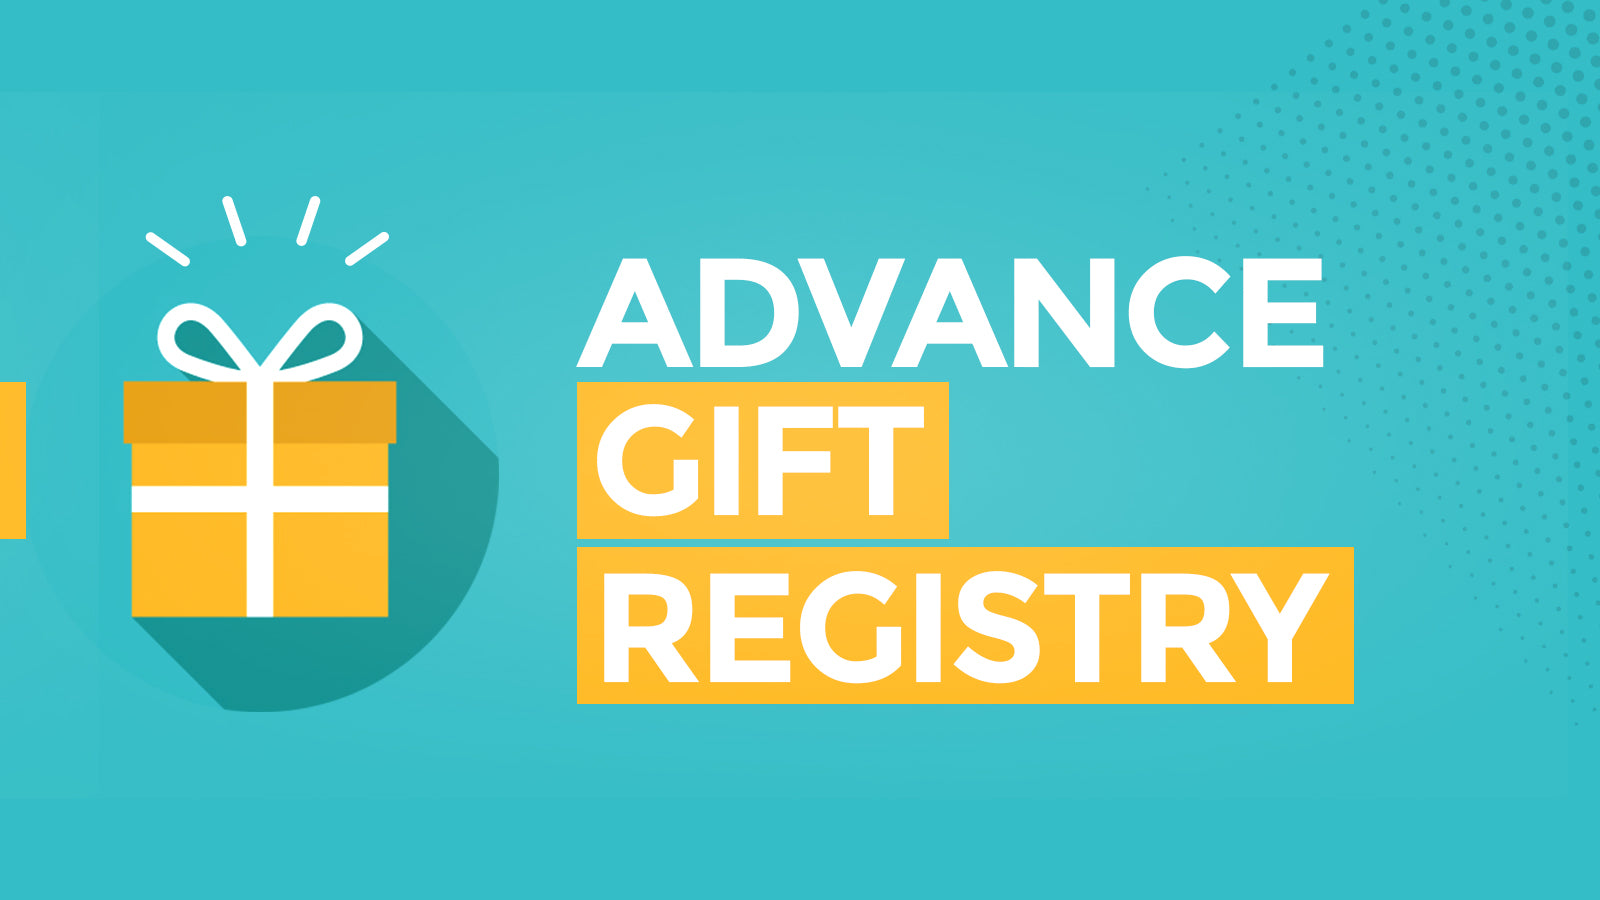 AAA Create Gift Registry - Share Gift Registries | List & Receive Gifts from friends | Shopify App Store